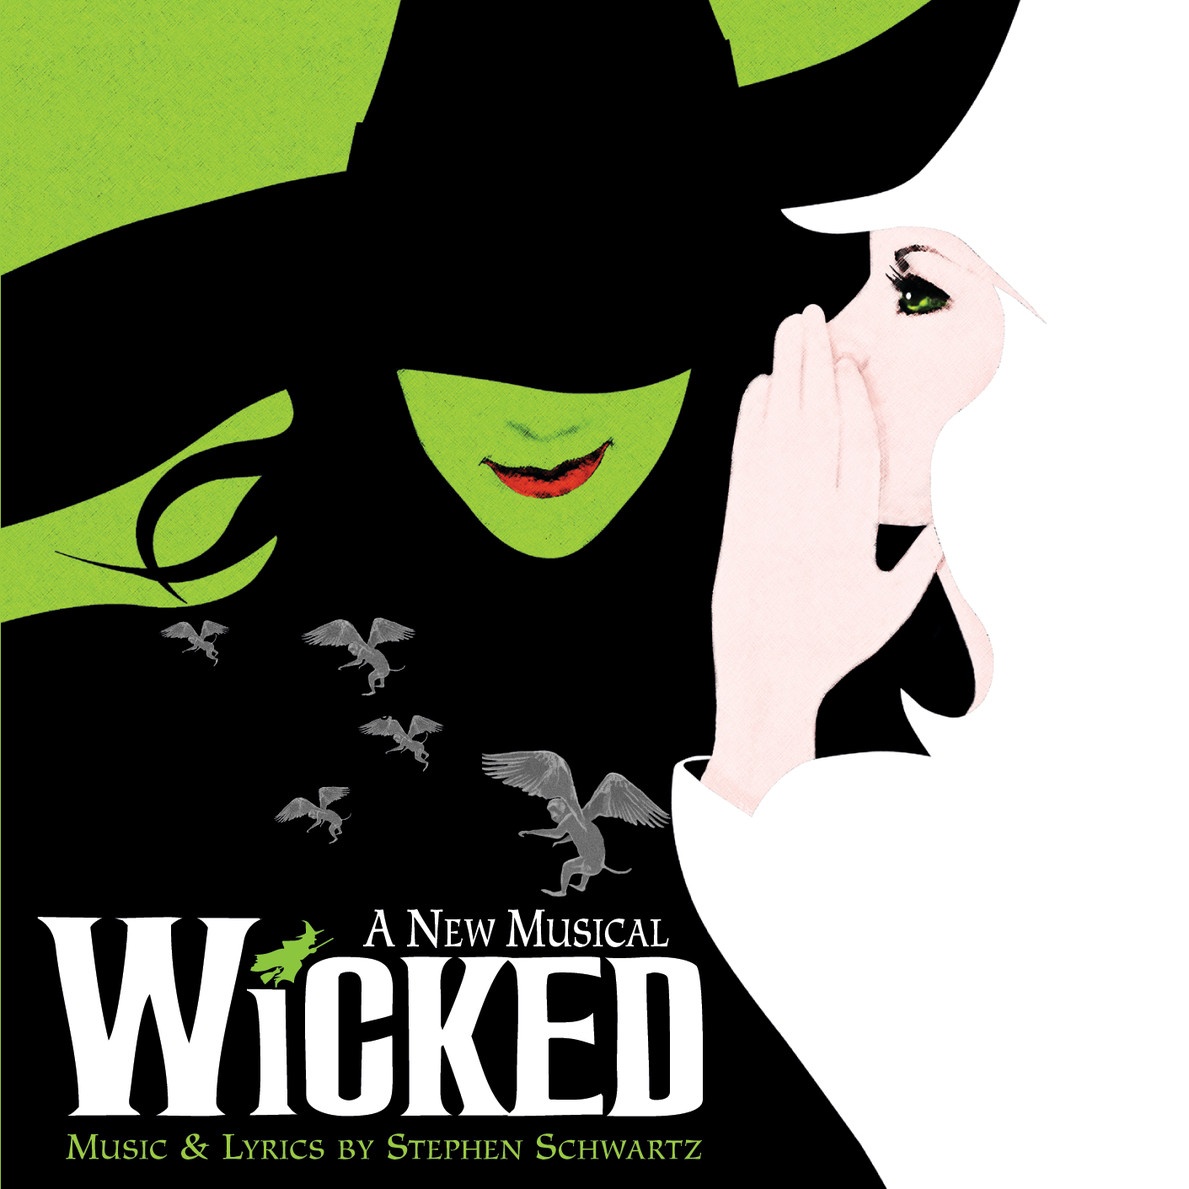 No One Mourns The Wicked - From "Wicked" Original Broadway Cast Recording/2003